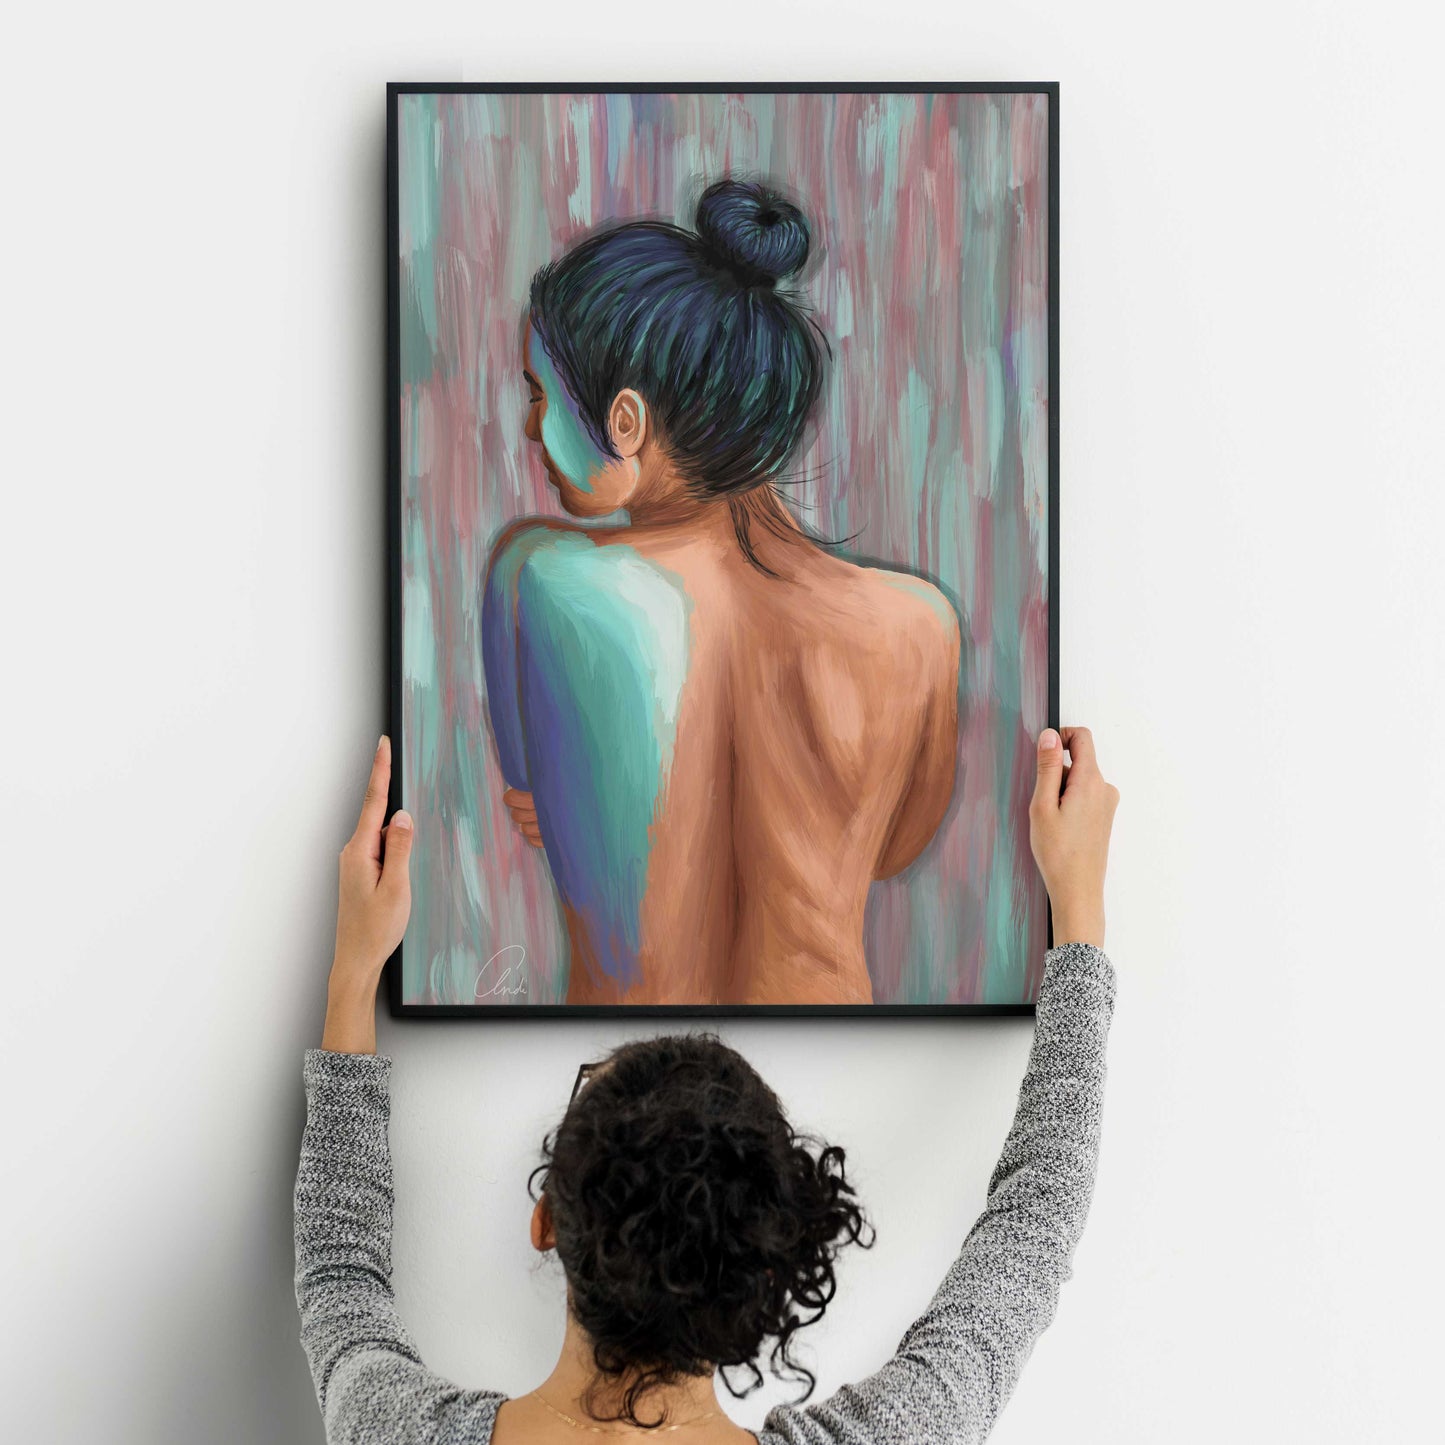 Oil Painting Female Form Print | Poster Decor Wall Art Print | A2 A3 A4